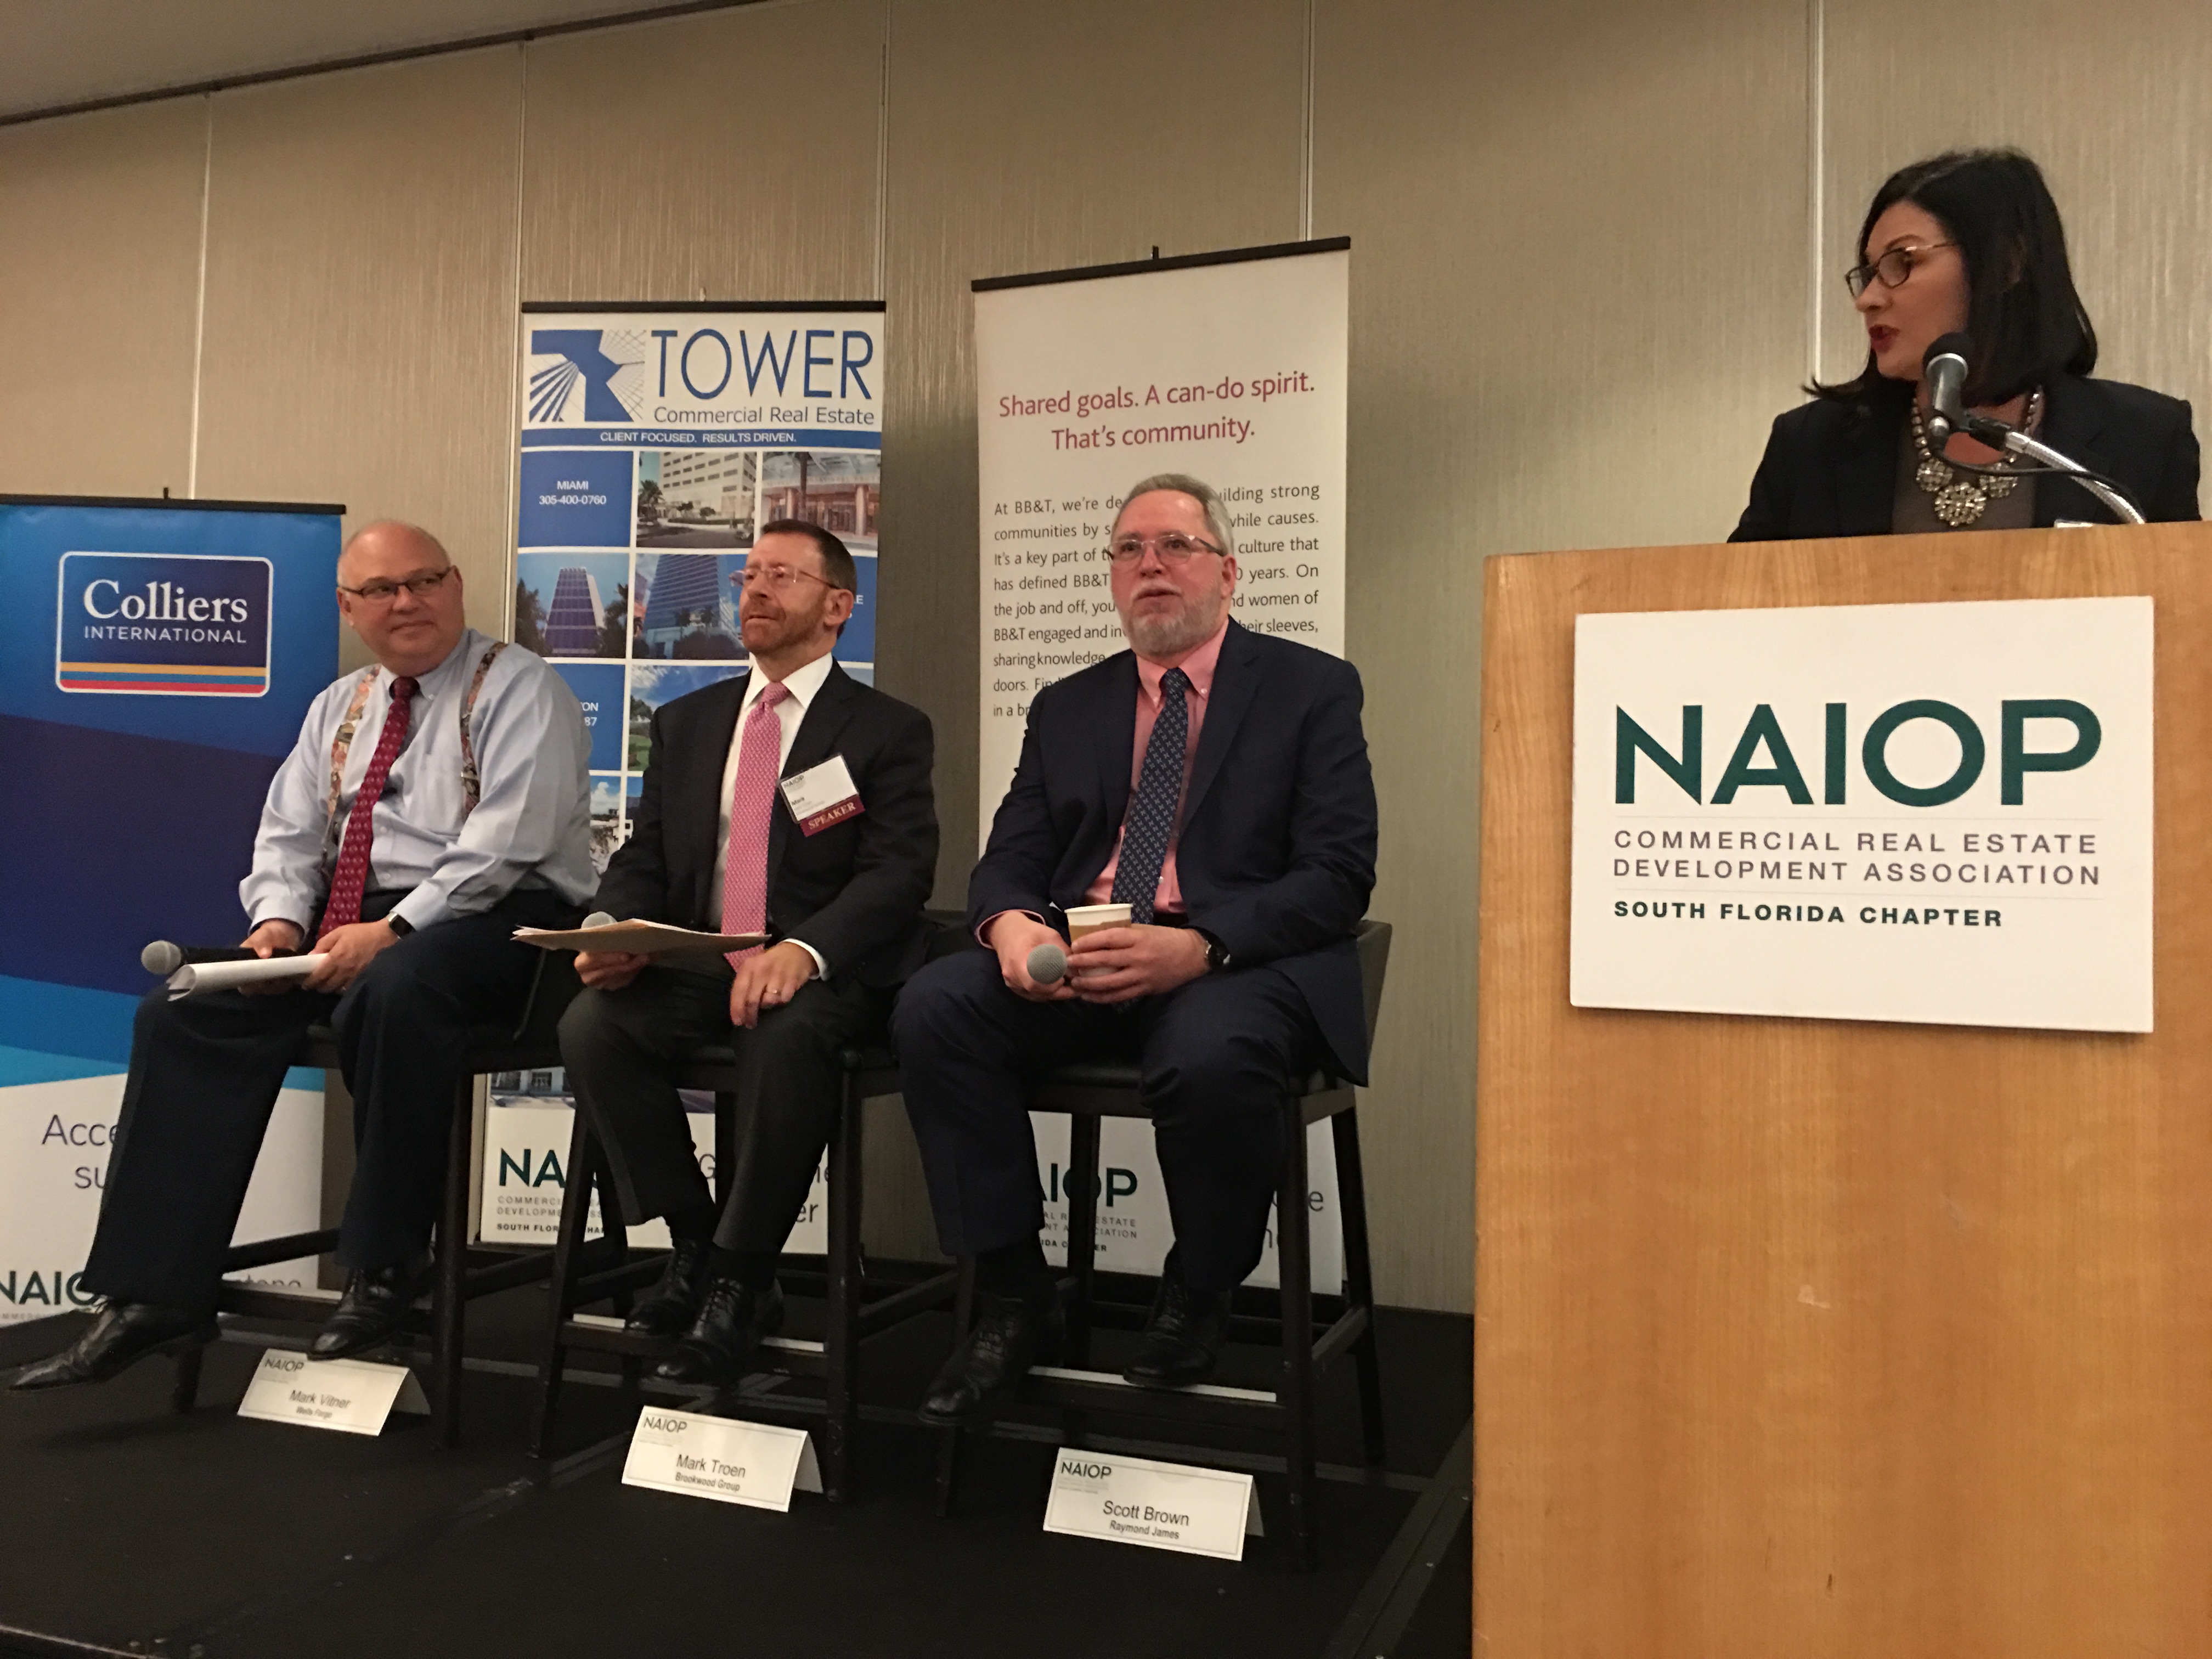 NAIOP Panelists Mark Vitner, Mark Troen and Scott Brown with NAIOP President and moderator Darcie Lunsford